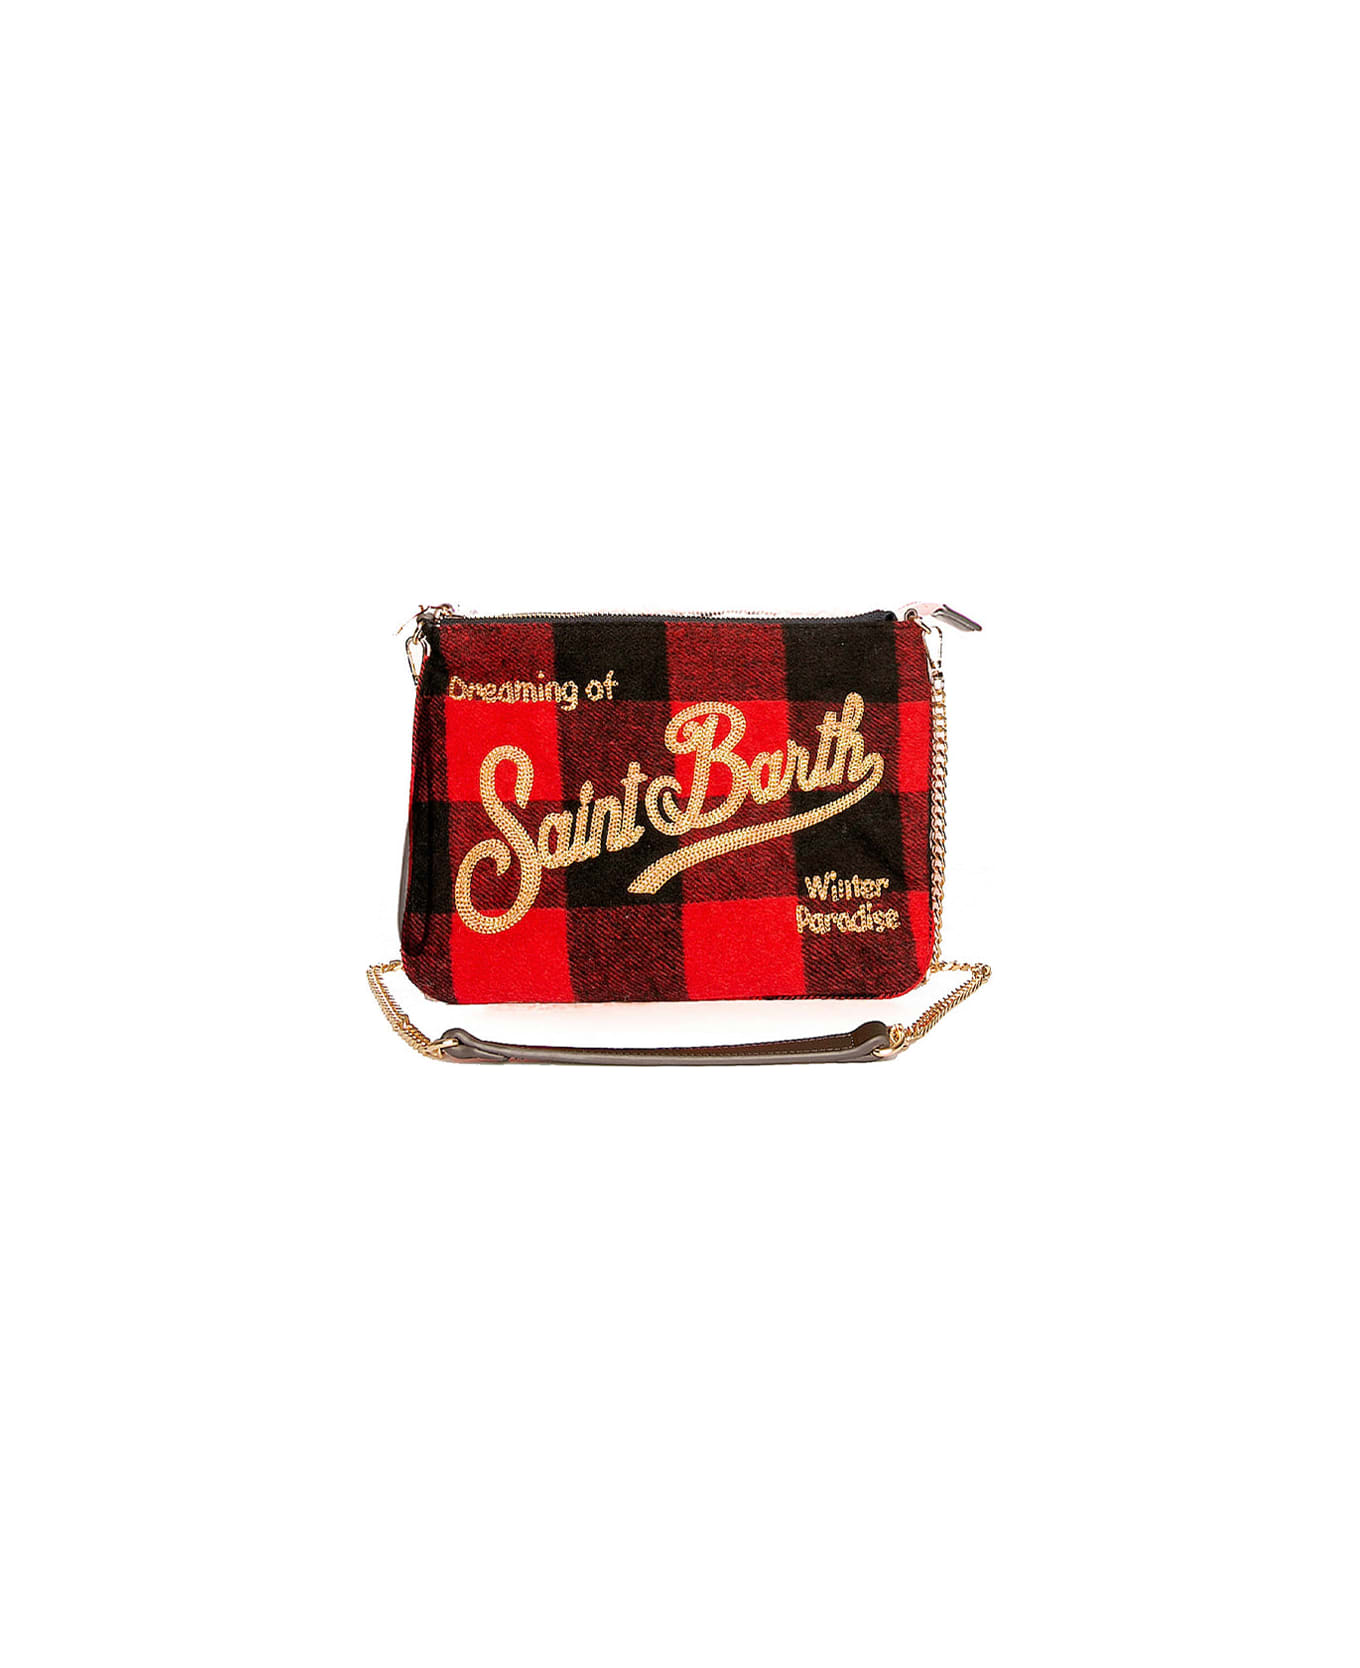 MC2 Saint Barth Parisienne Check Wooly Cross-body Pouch Bag - RED トラベルバッグ